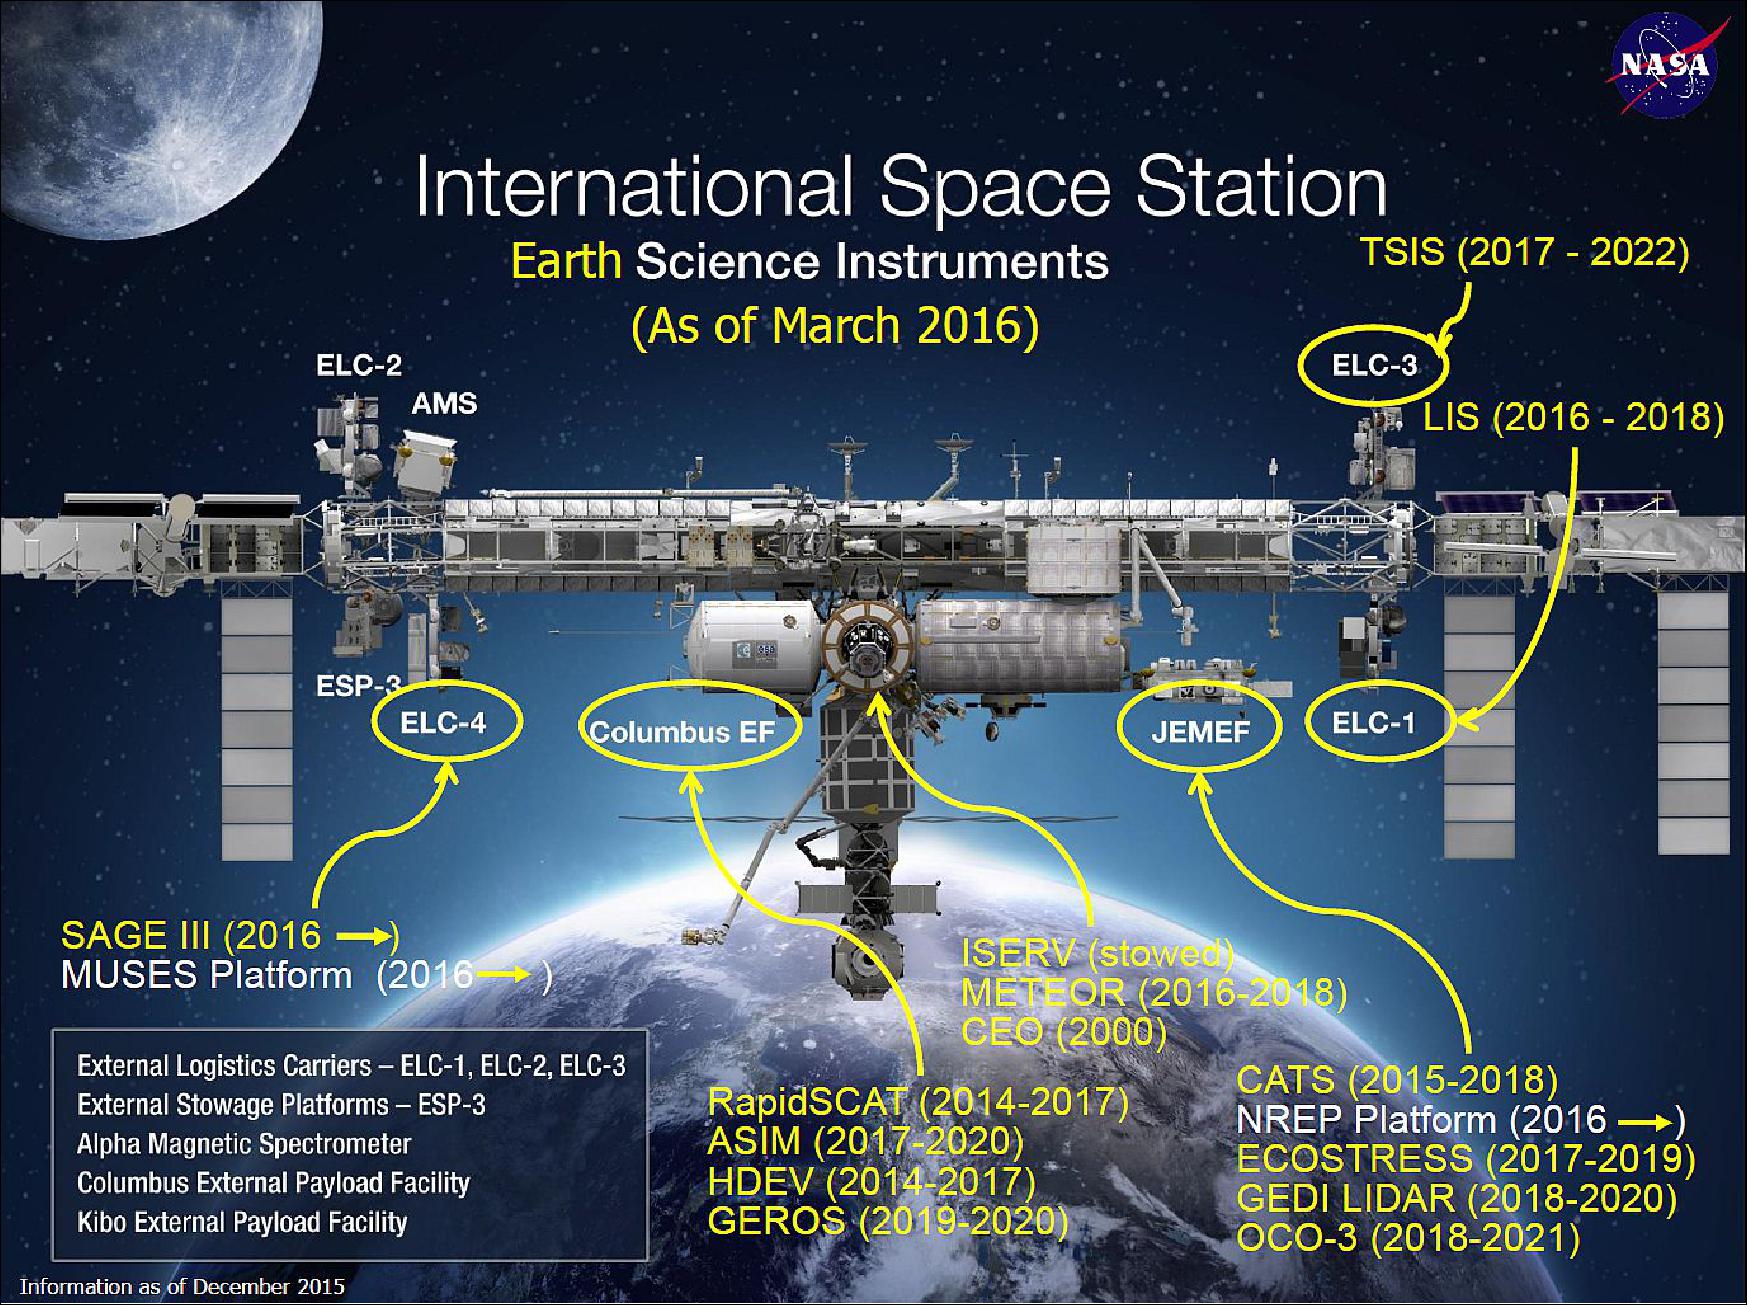 Figure 7: Overview of Earth science instruments on the ISS (installed or planned) in the second decade of the 21st century (image credit: NASA) 7)